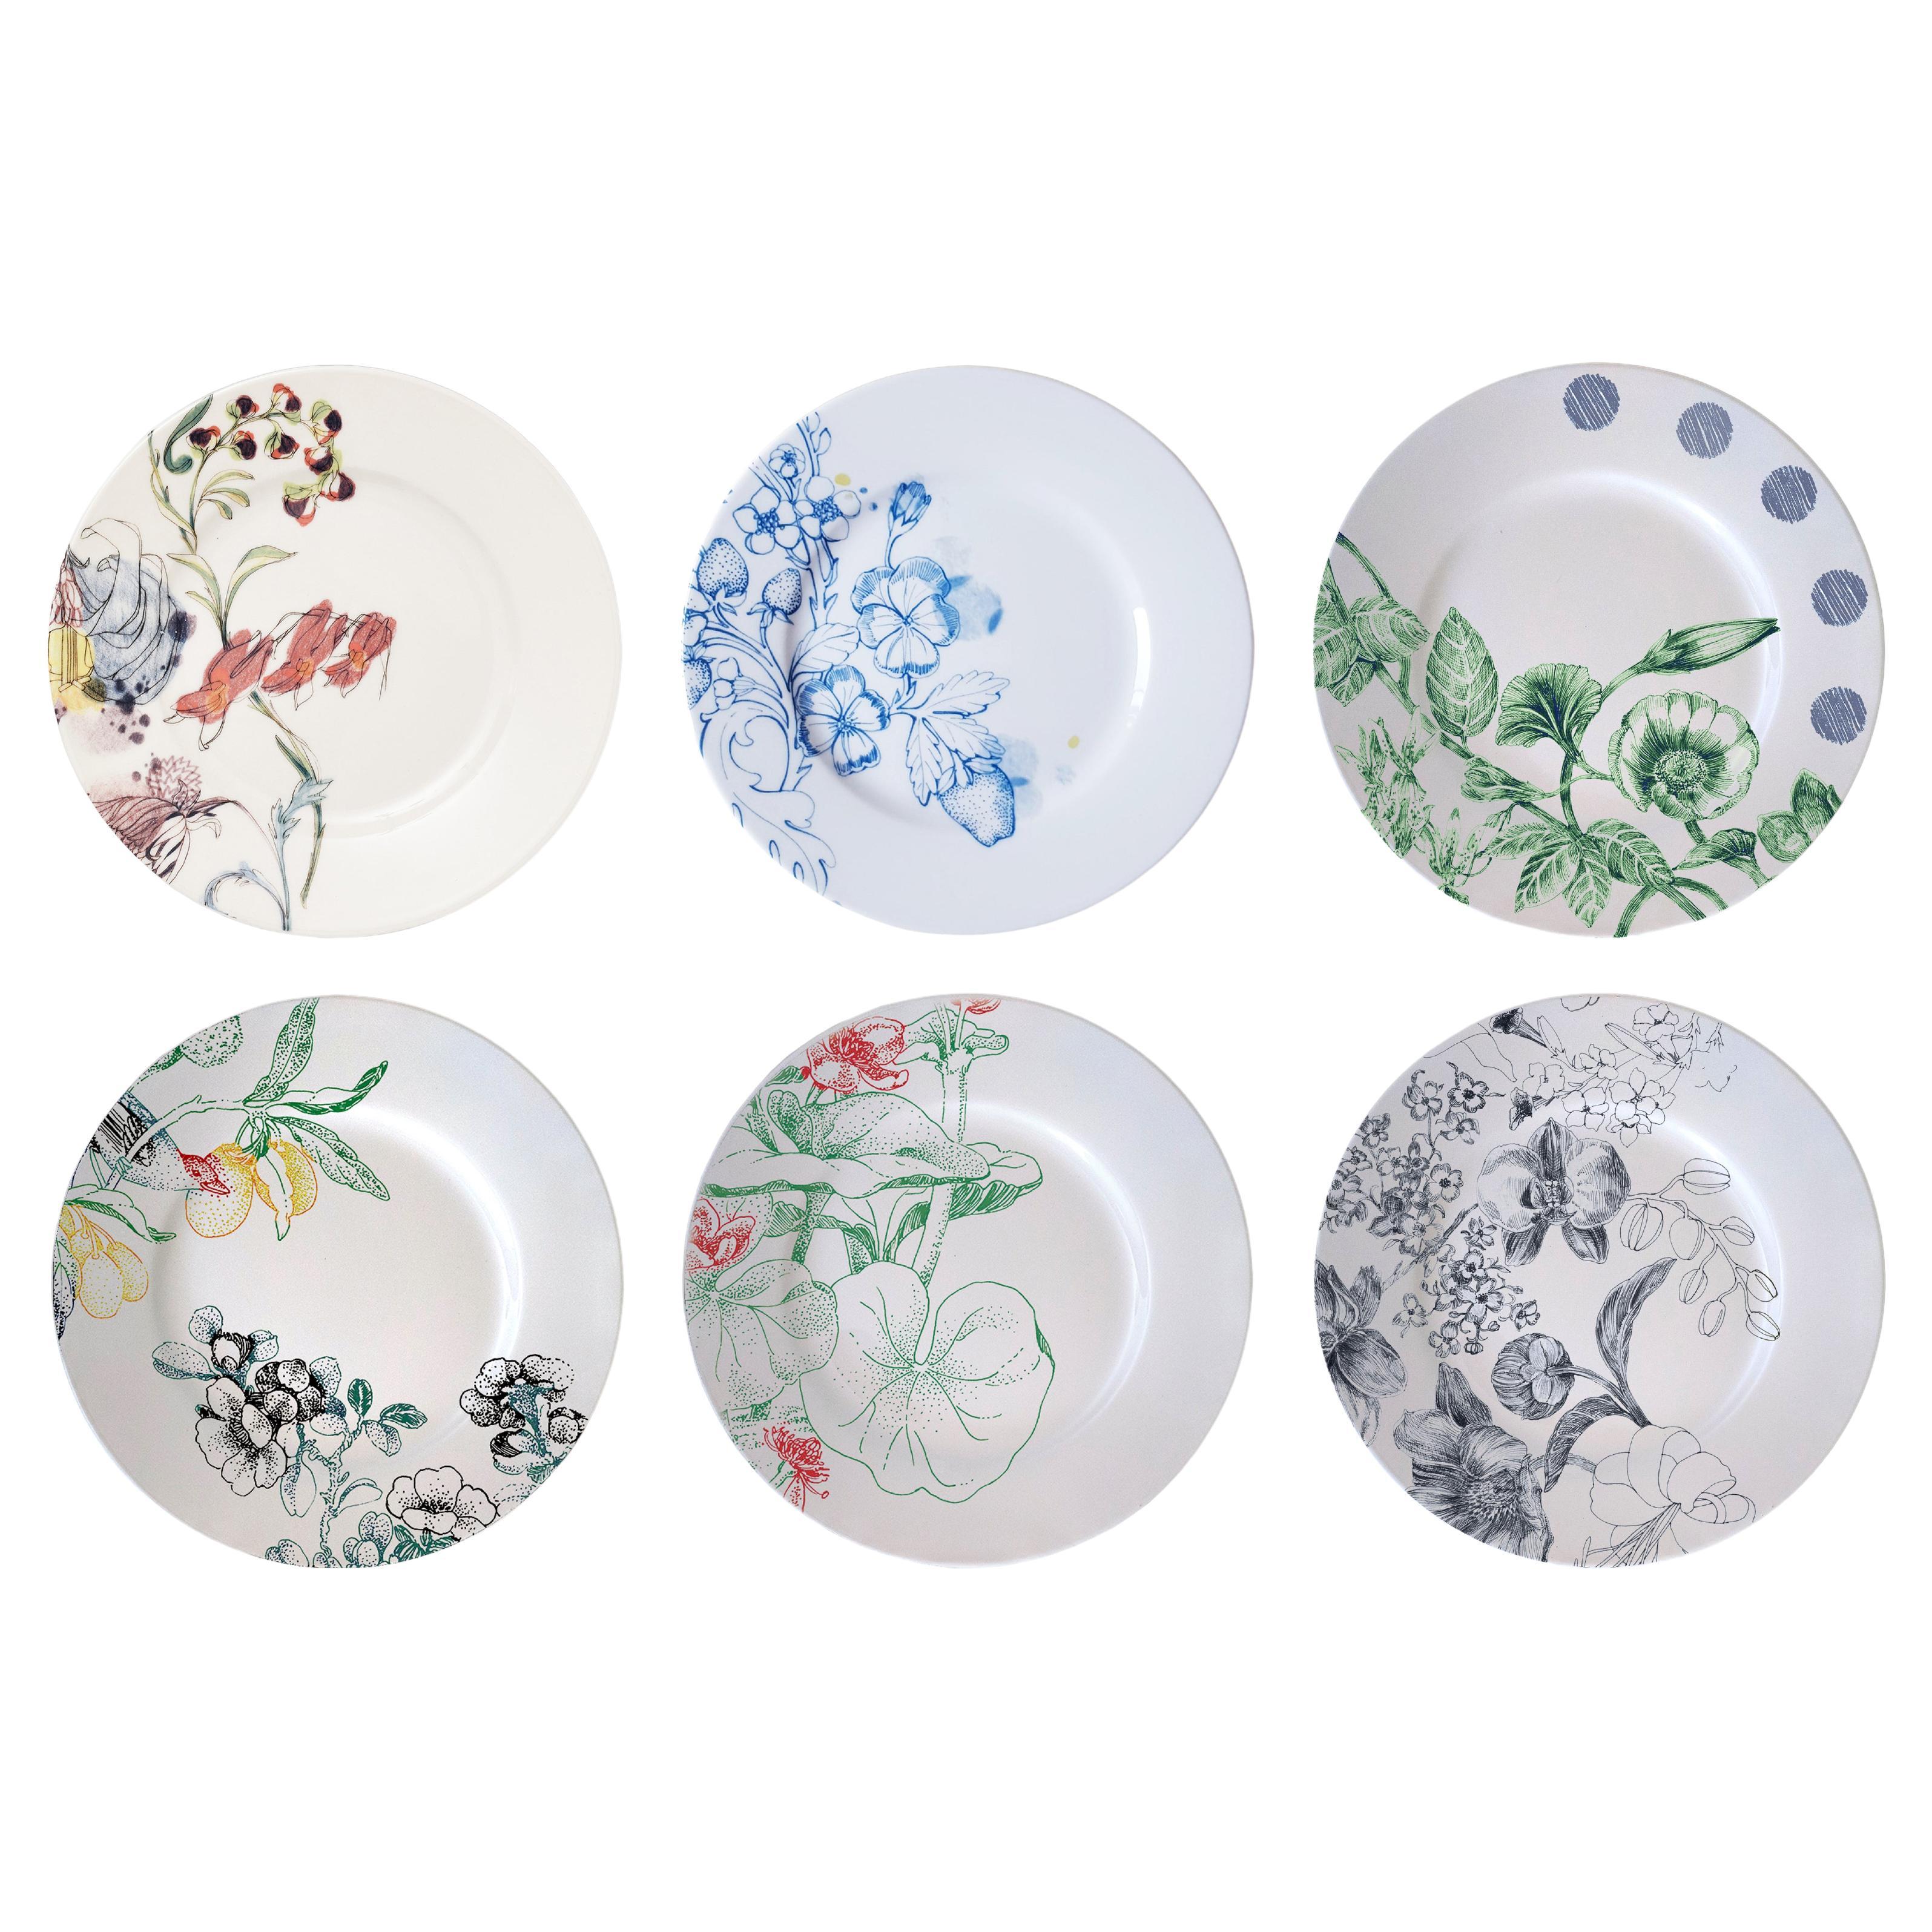 Mix & Match, Six Contemporary Porcelain Dessert Plates with Multicolored Flowers For Sale